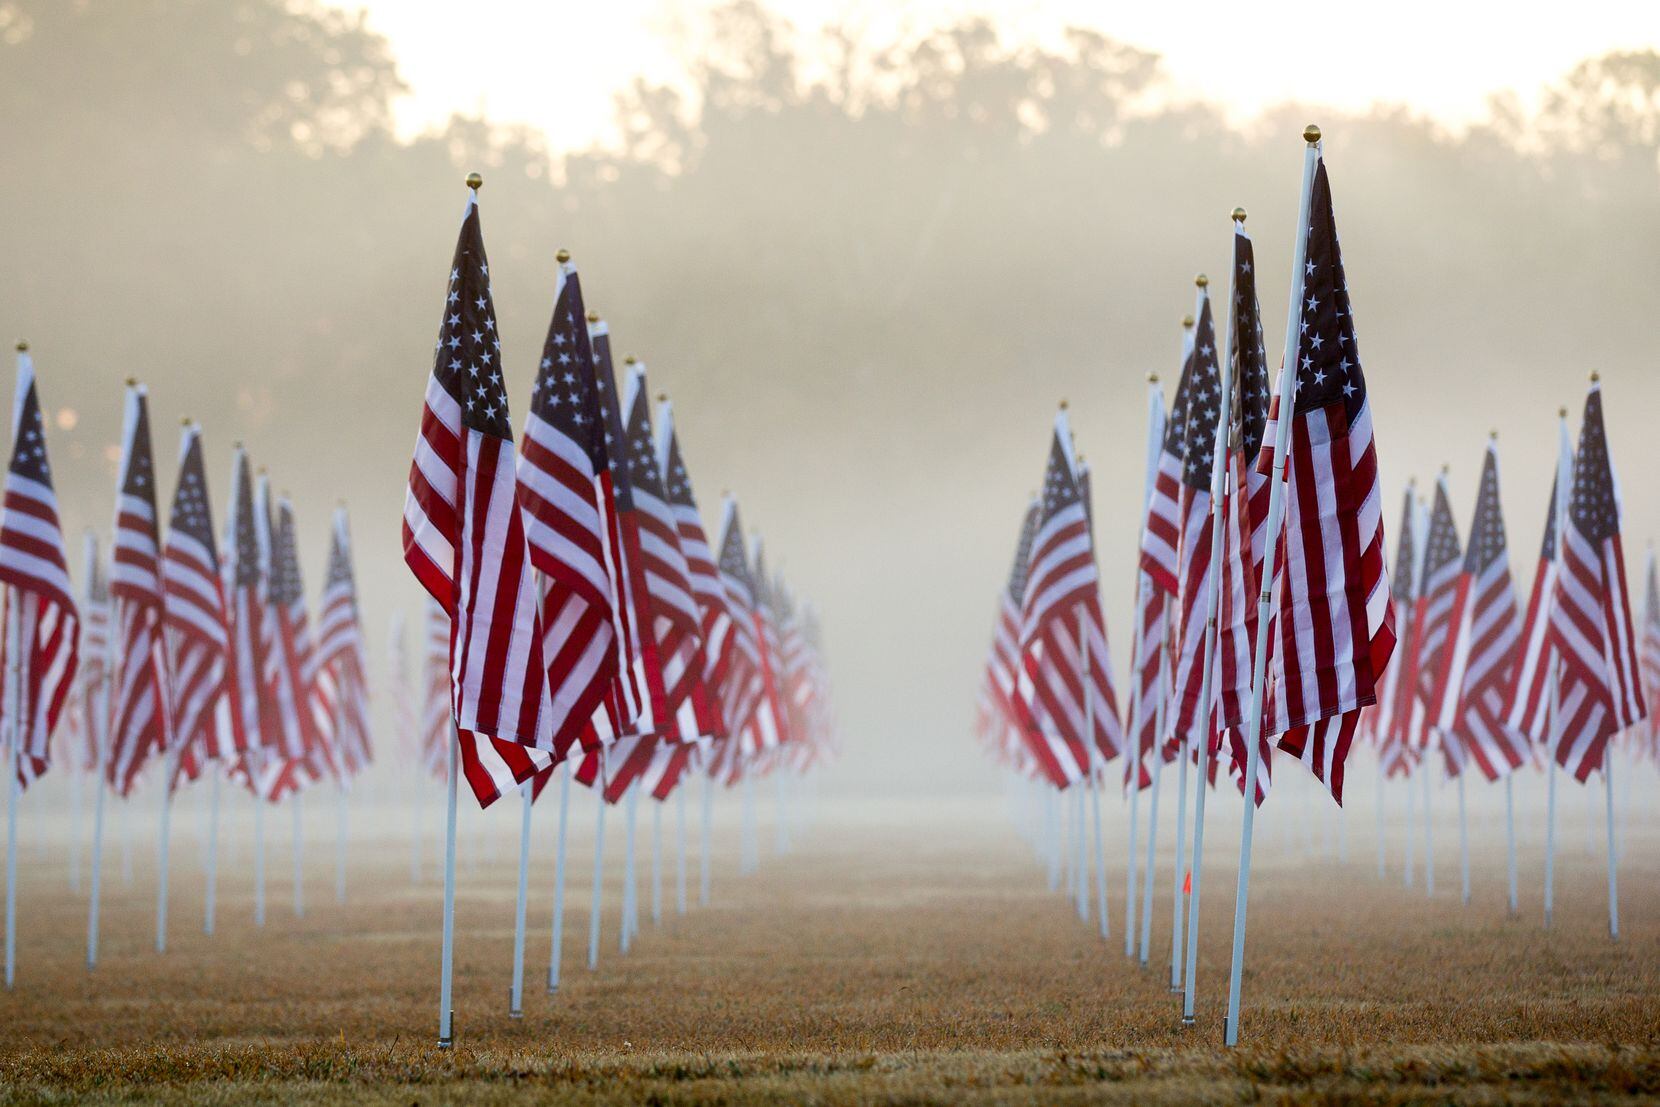 The Plano East Rotary Club observes Veterans Day by setting out hundreds of American flags...